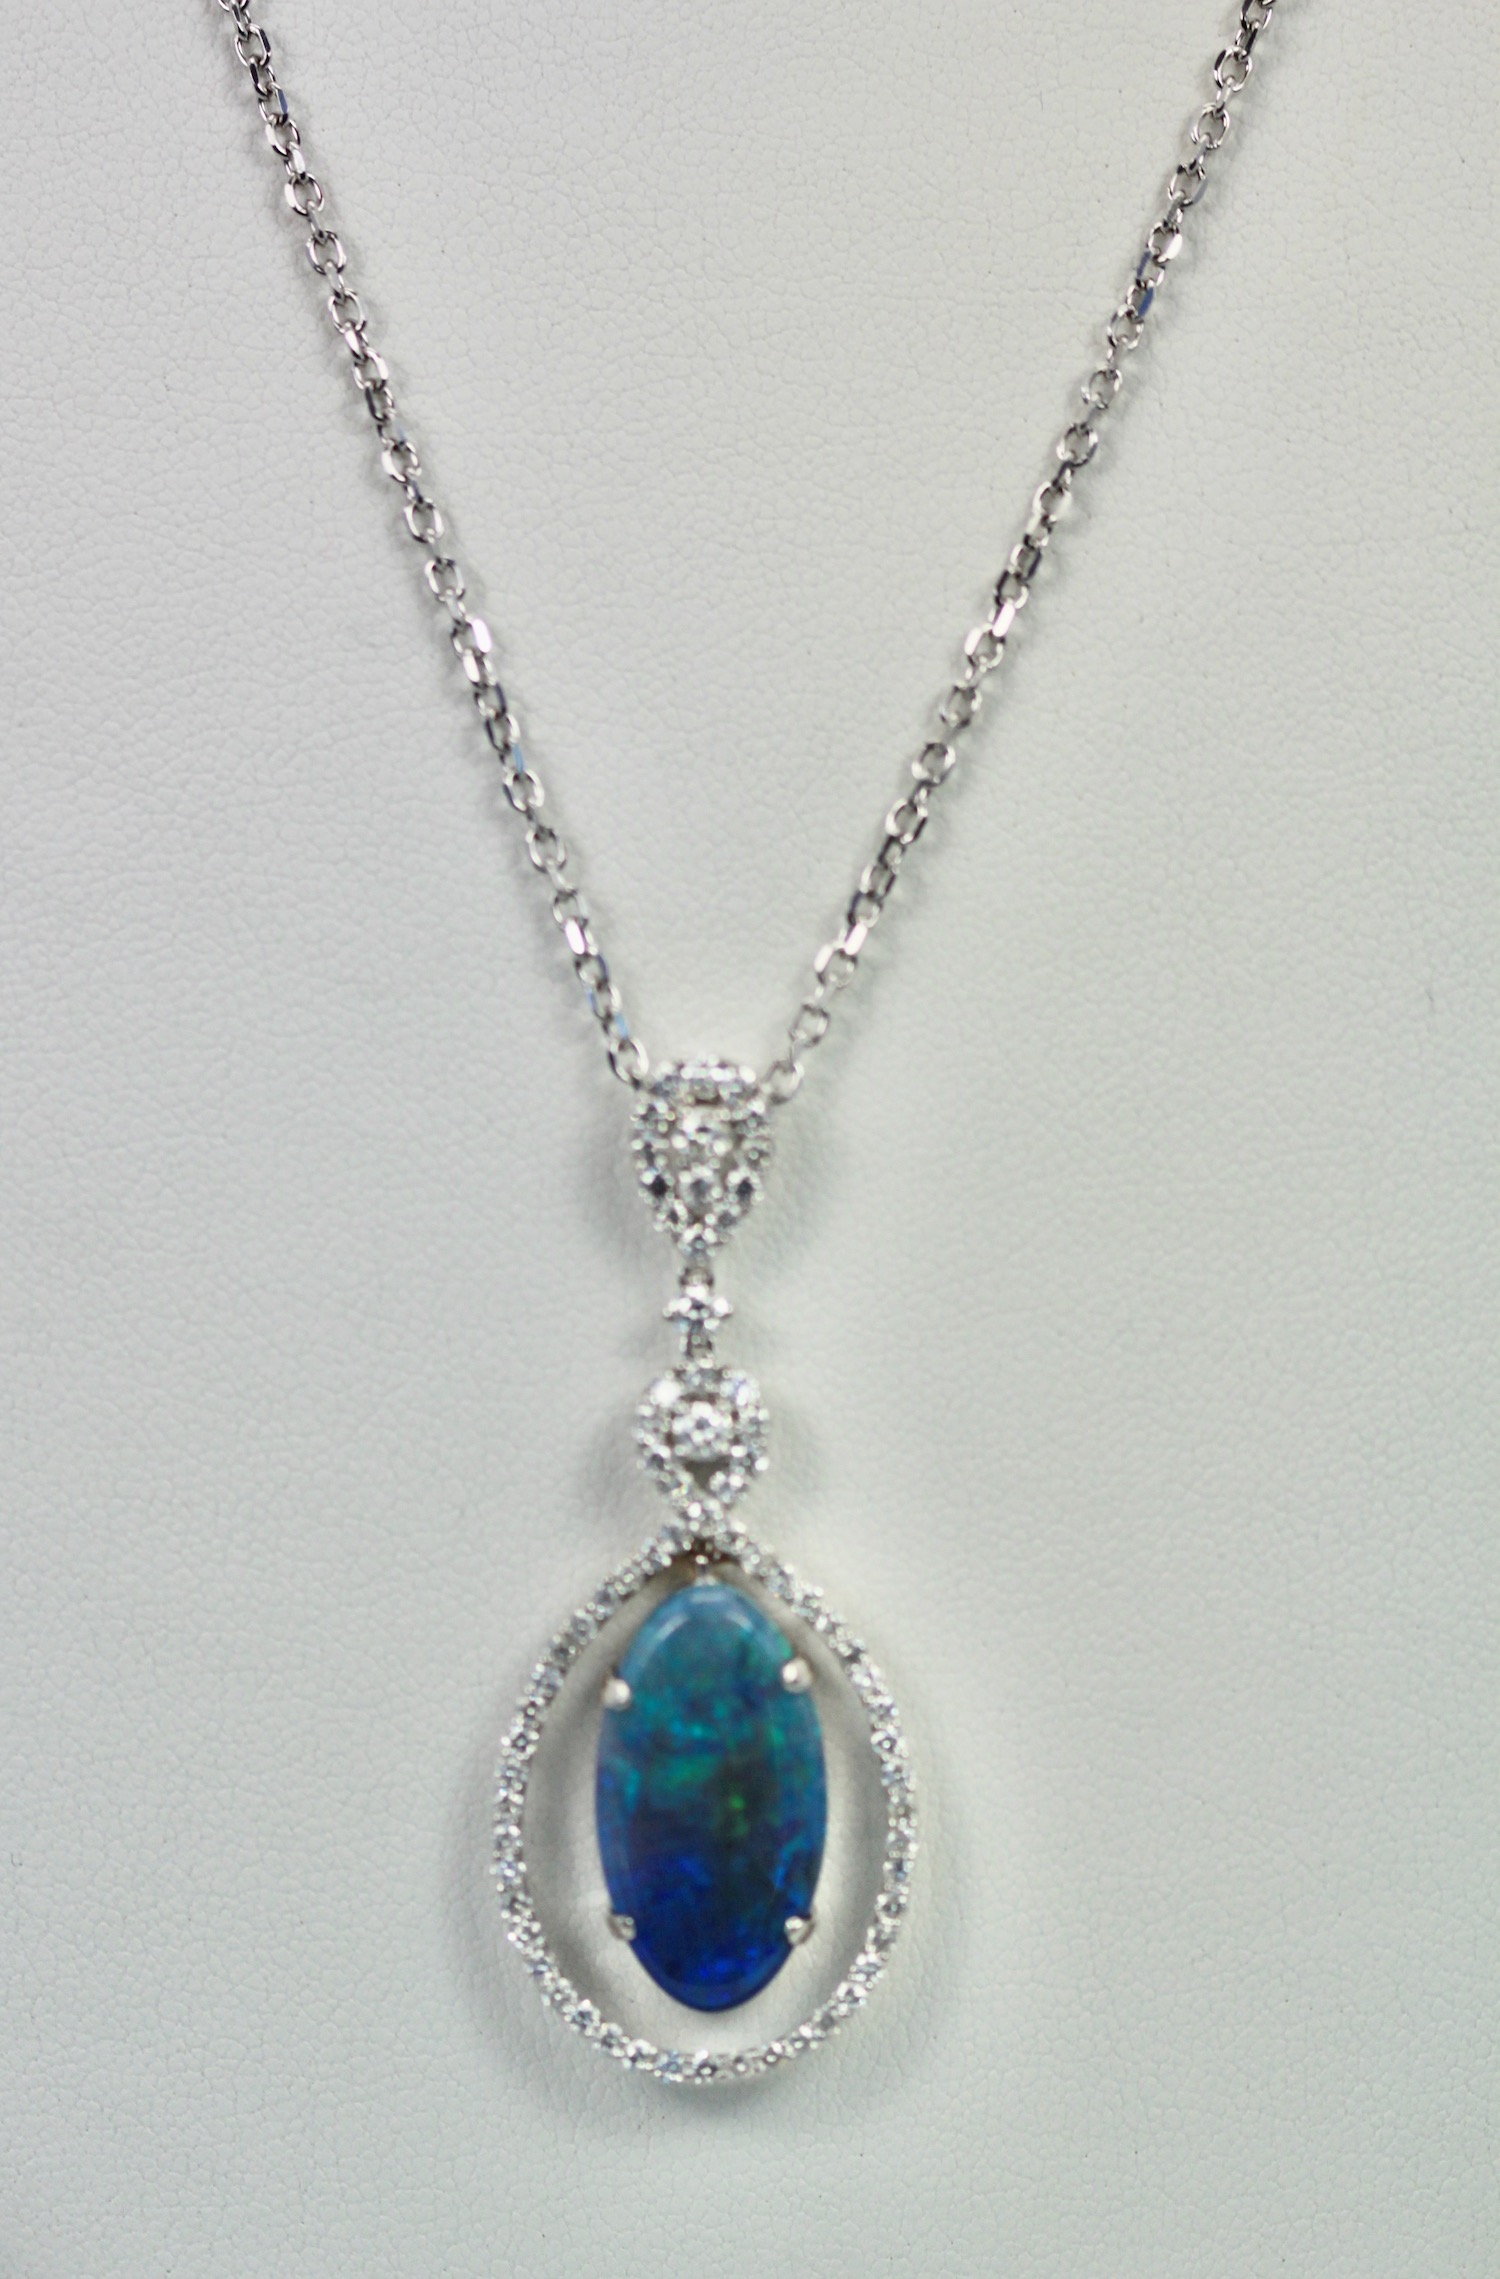 Black Crystal Opal Pendant with Diamond Surround – hanging